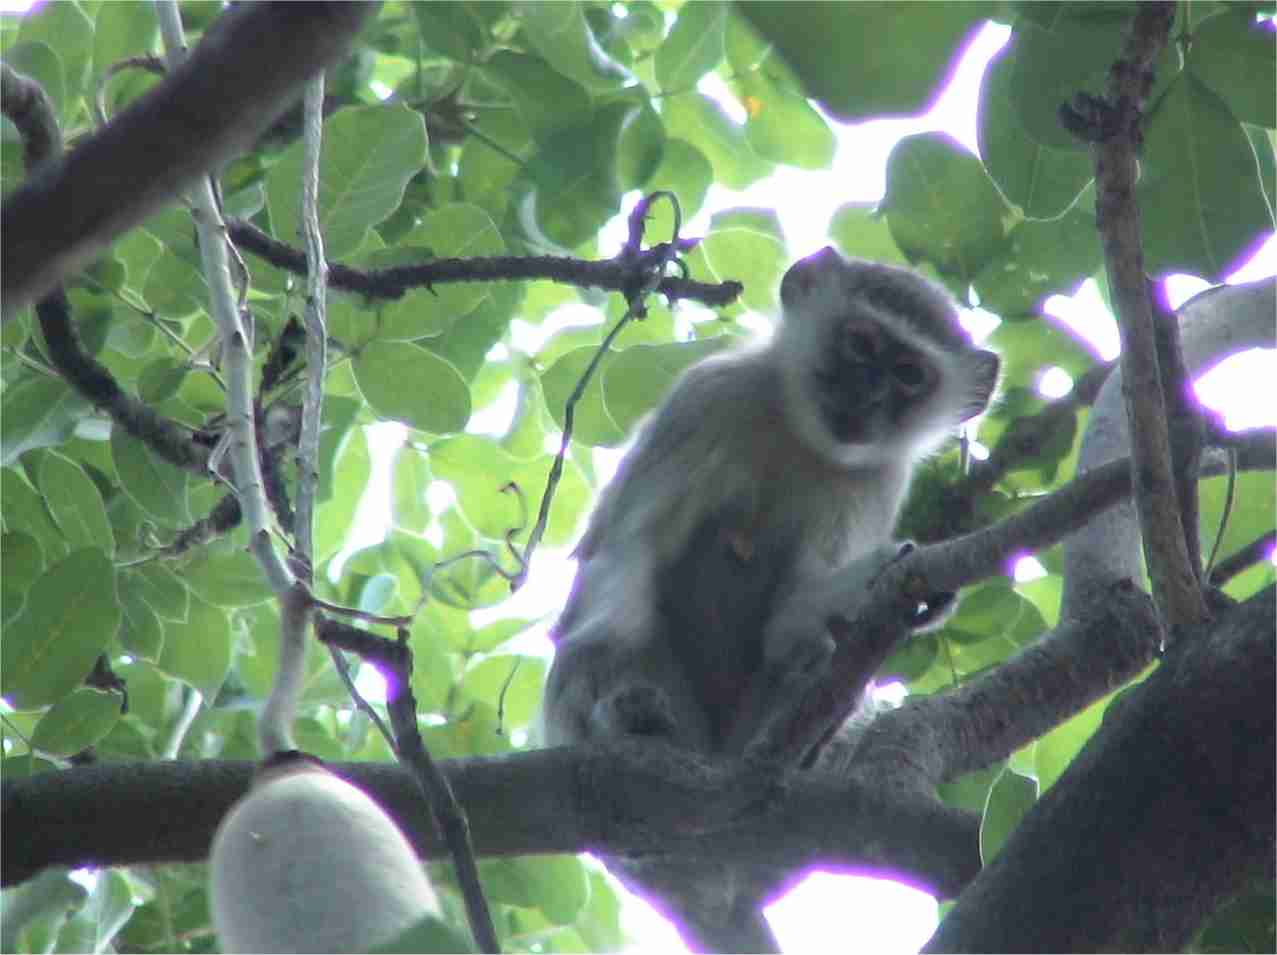 A monkey stares at me from his perch up in a tree.  Photo by FG.